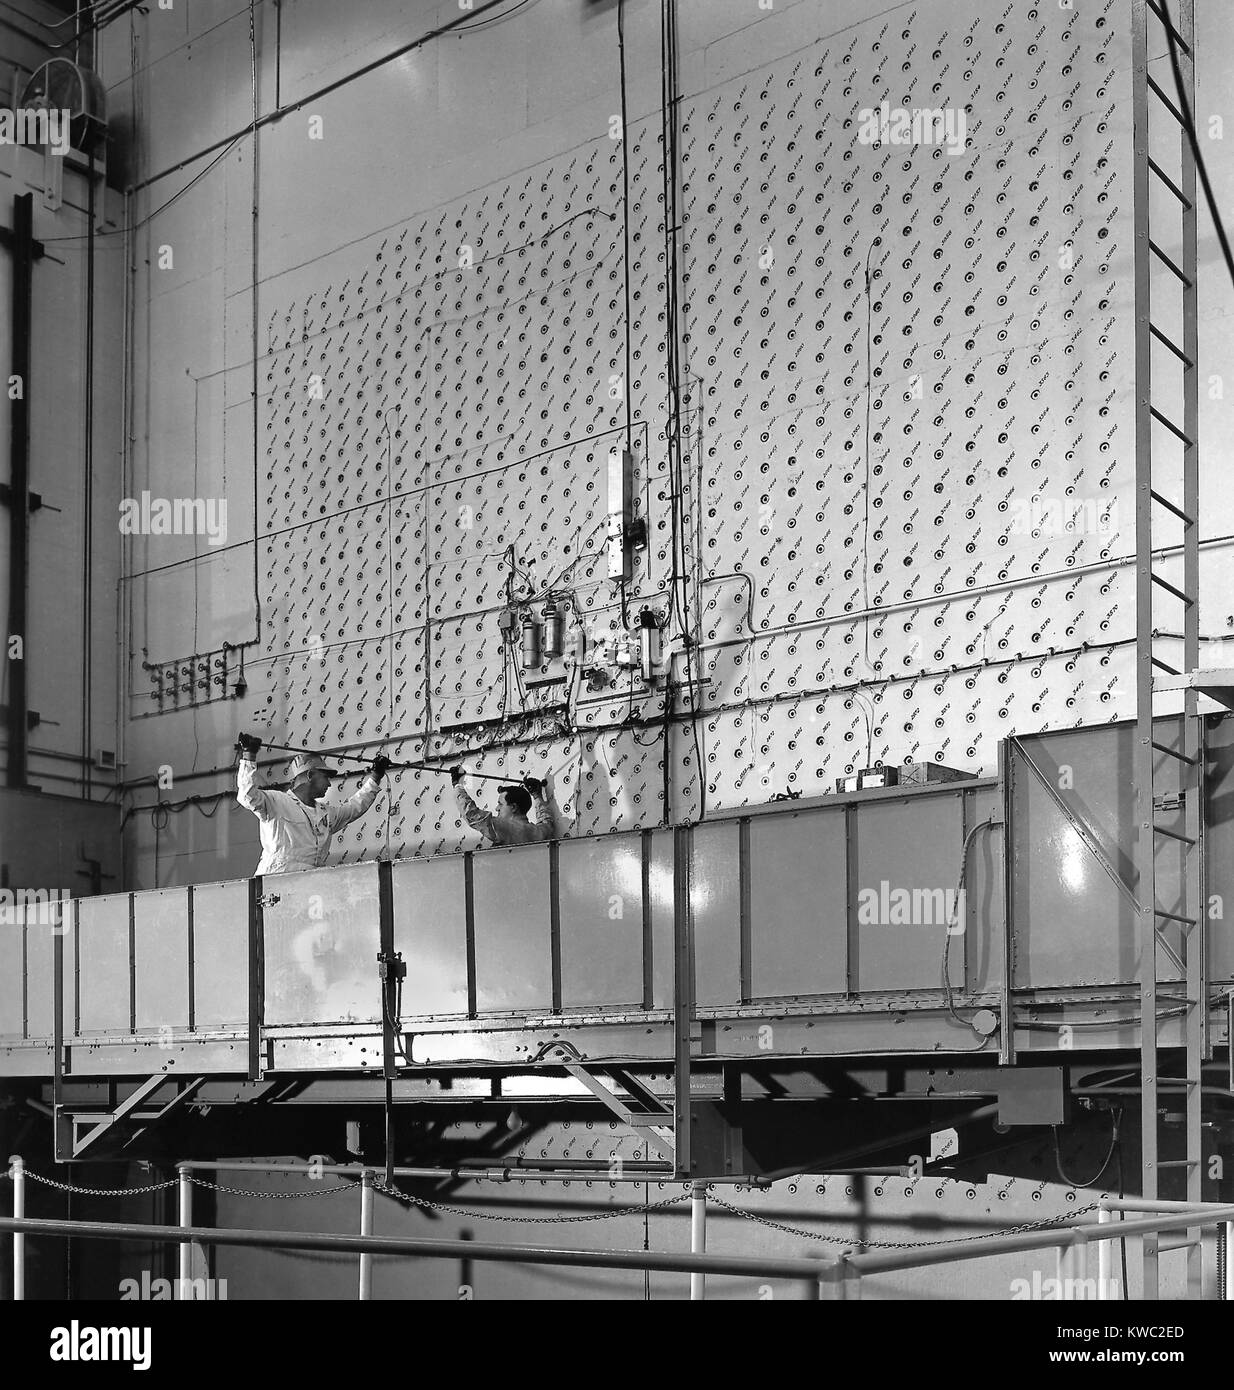 X-10 Graphite Reactor's was the world's second artificial nuclear reactor. Photo shows the x-10's concrete face at Oak Ridge National Laboratory. After WW2, the graphite reactor became the first facility in the world to provide radioactive isotopes for peacetime use. It produced the isotopes iodine-131, phosphorus-32, and carbon-14, for scientific, medical, industrial, and agricultural uses. Graphite Reactor at X-10 was shut down in 1963, after twenty years of use. (BSLOC 2015 2 24) Stock Photo